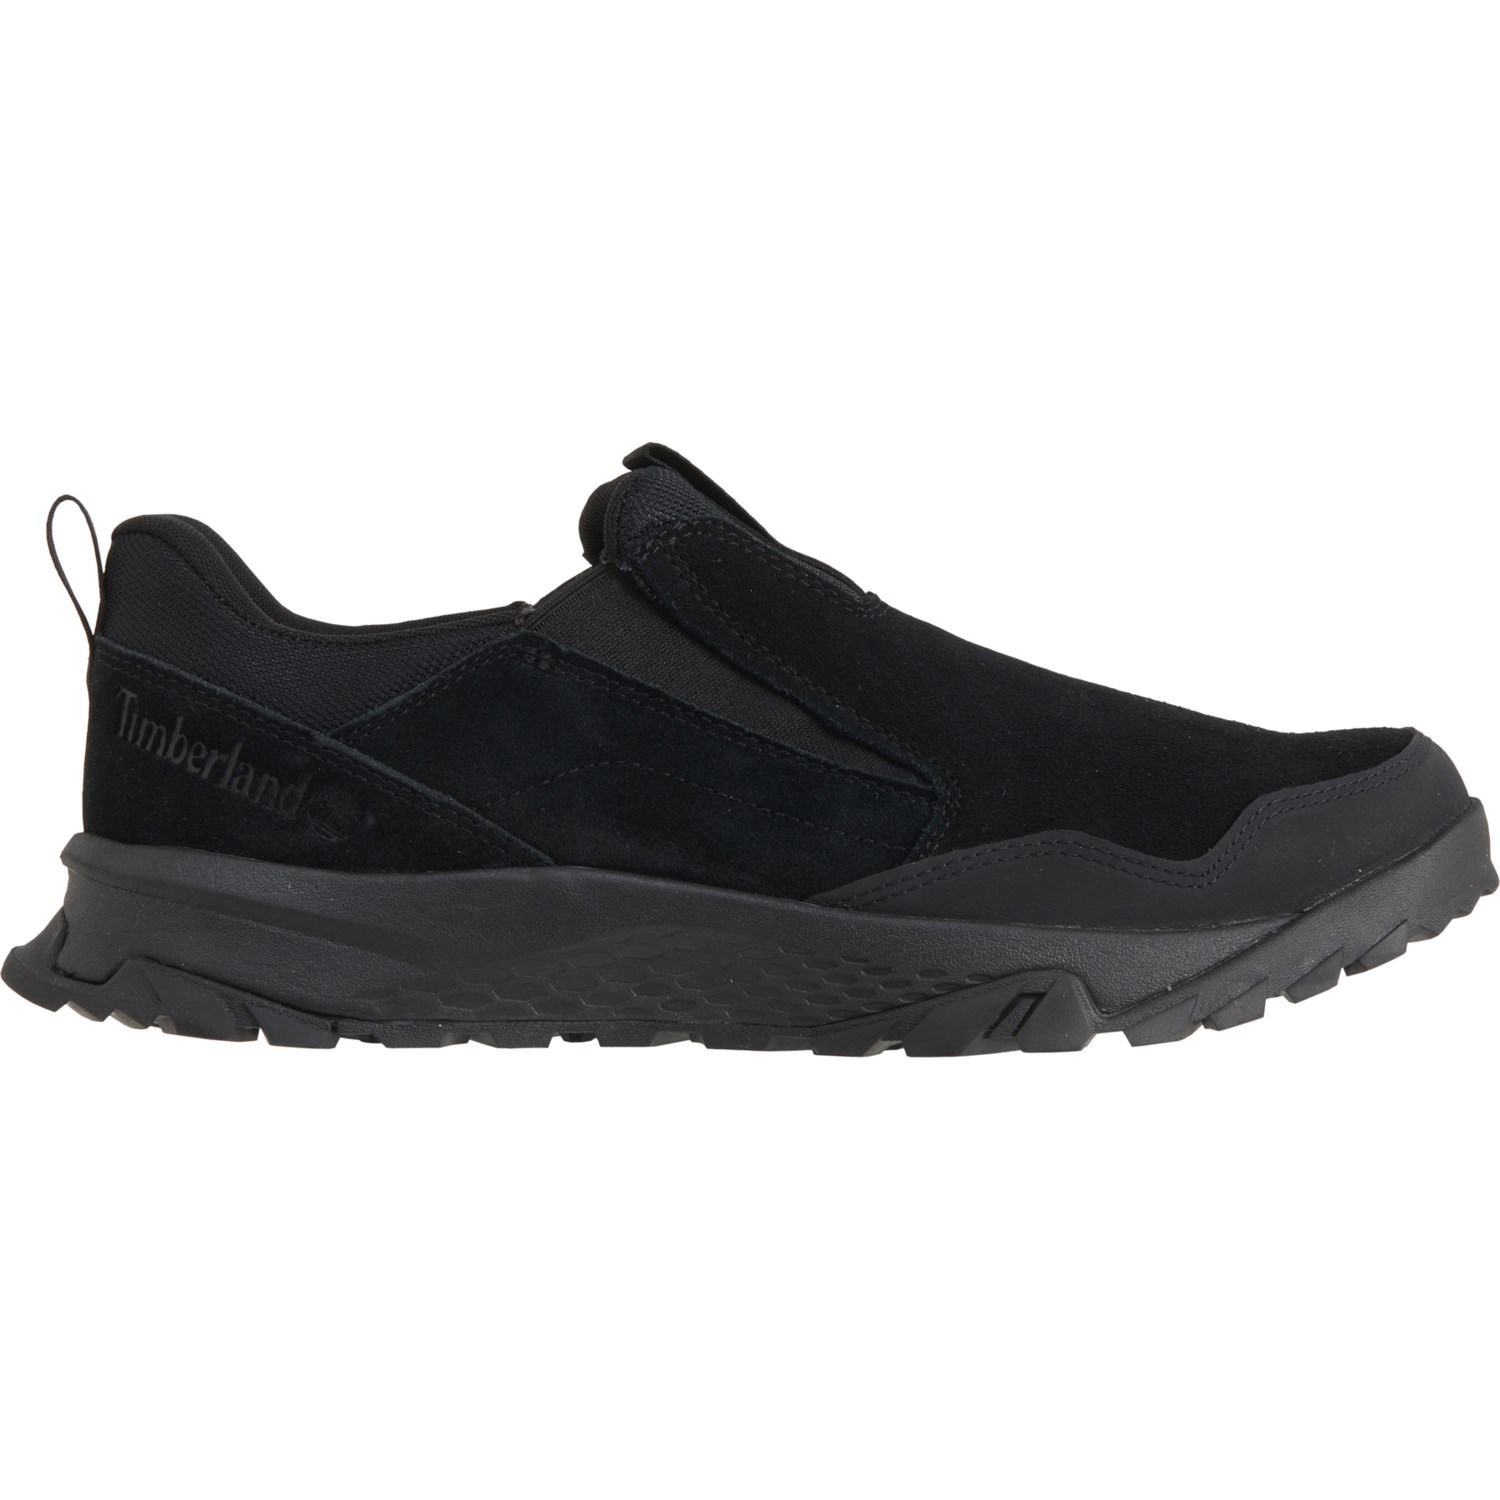 Timberland Lincoln Peak Lite Slip-On Shoes (For Men) - Save 63%